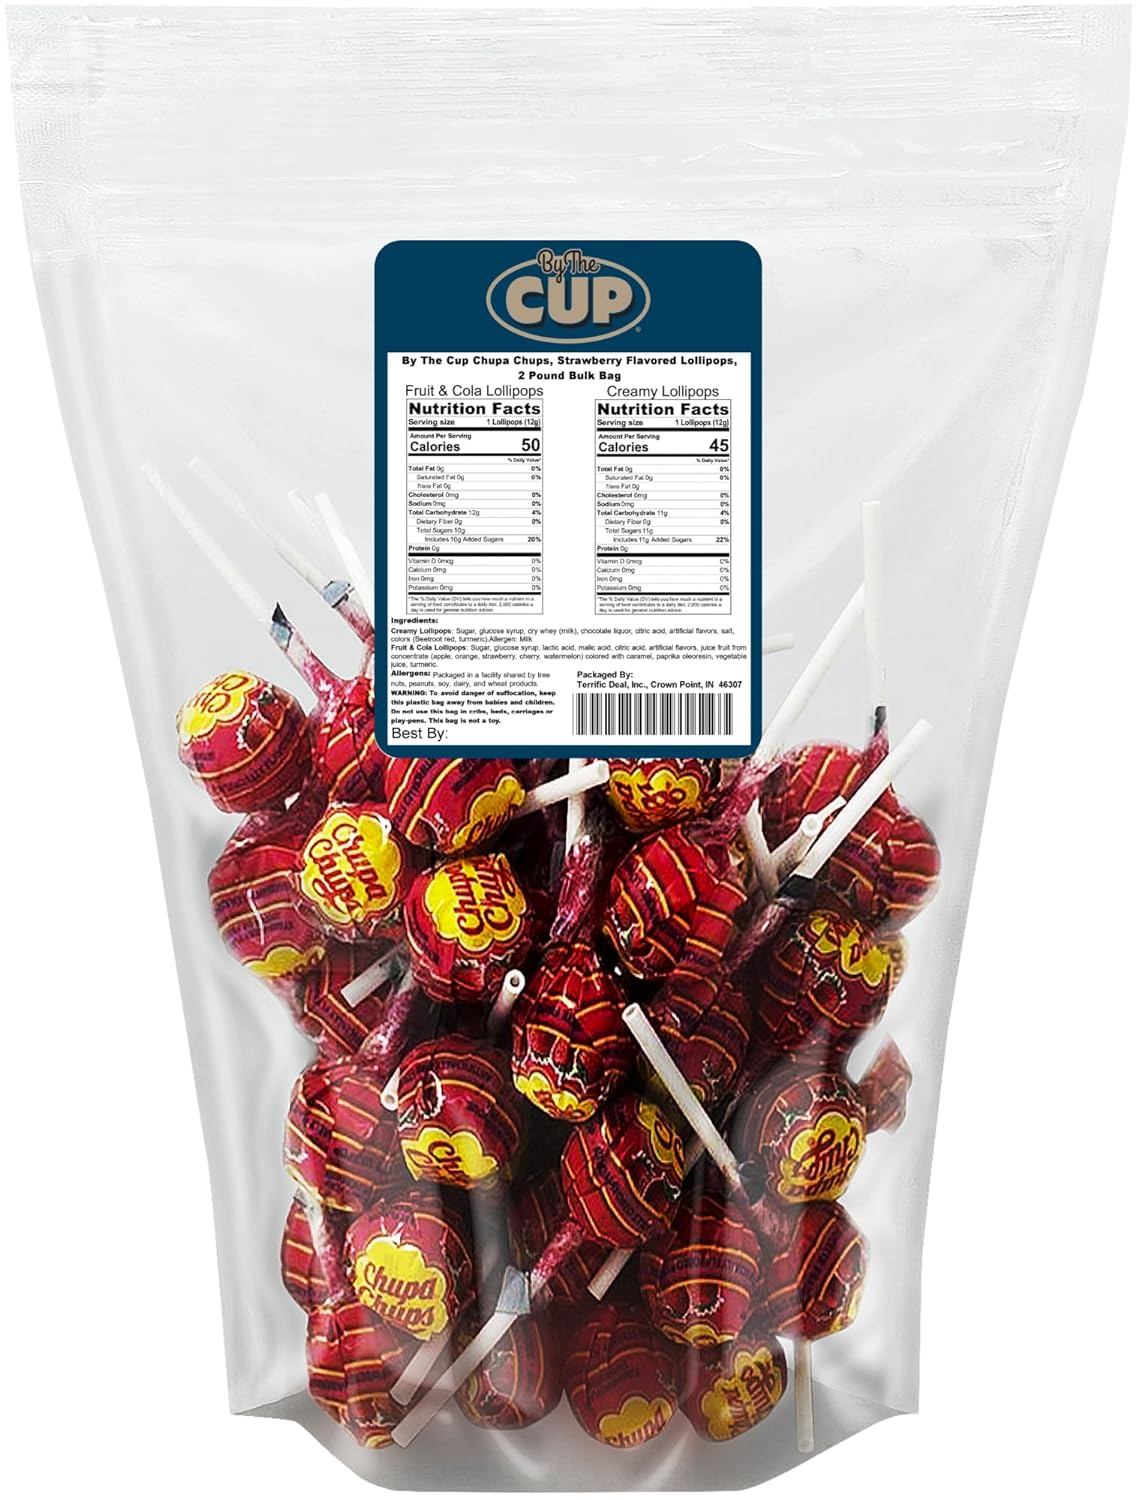 Chupa Chups Strawberry, Approximately 65 Lollipops, 2 Pound By The Cup Bulk Bag